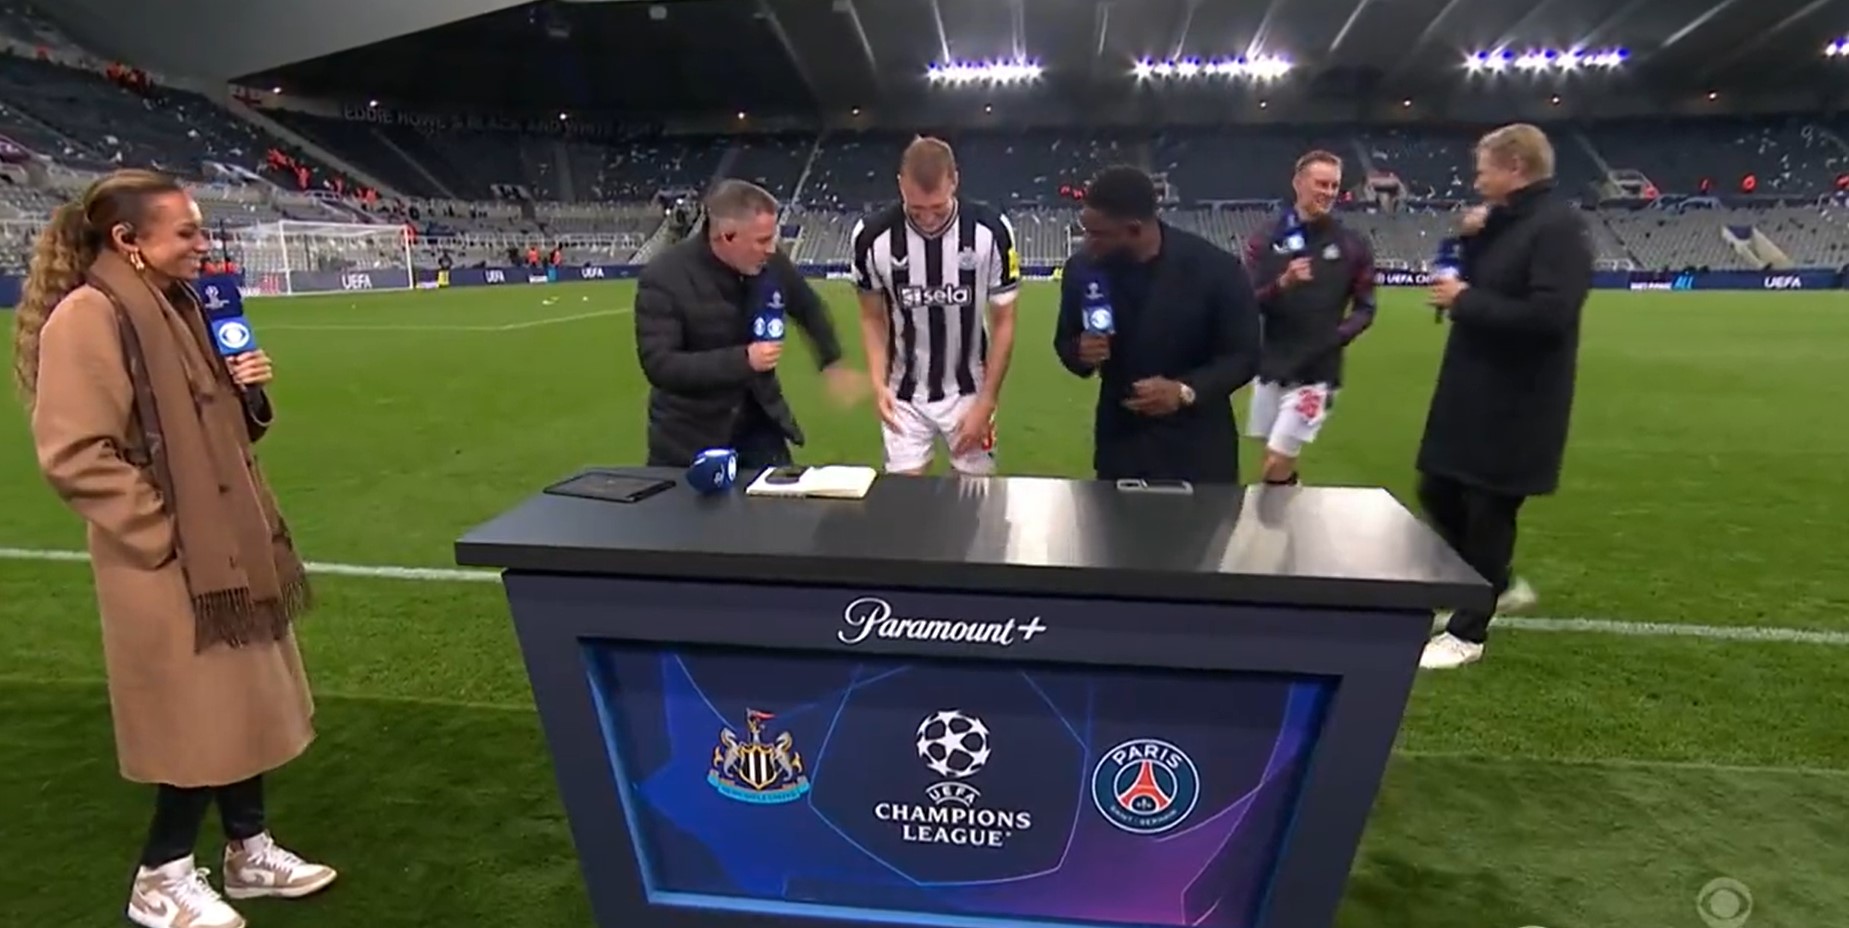 Newcastle hero Dan Burn recreates outrageous dance that will ‘smash the internet’ after stunning 4-1 smashing of PSG